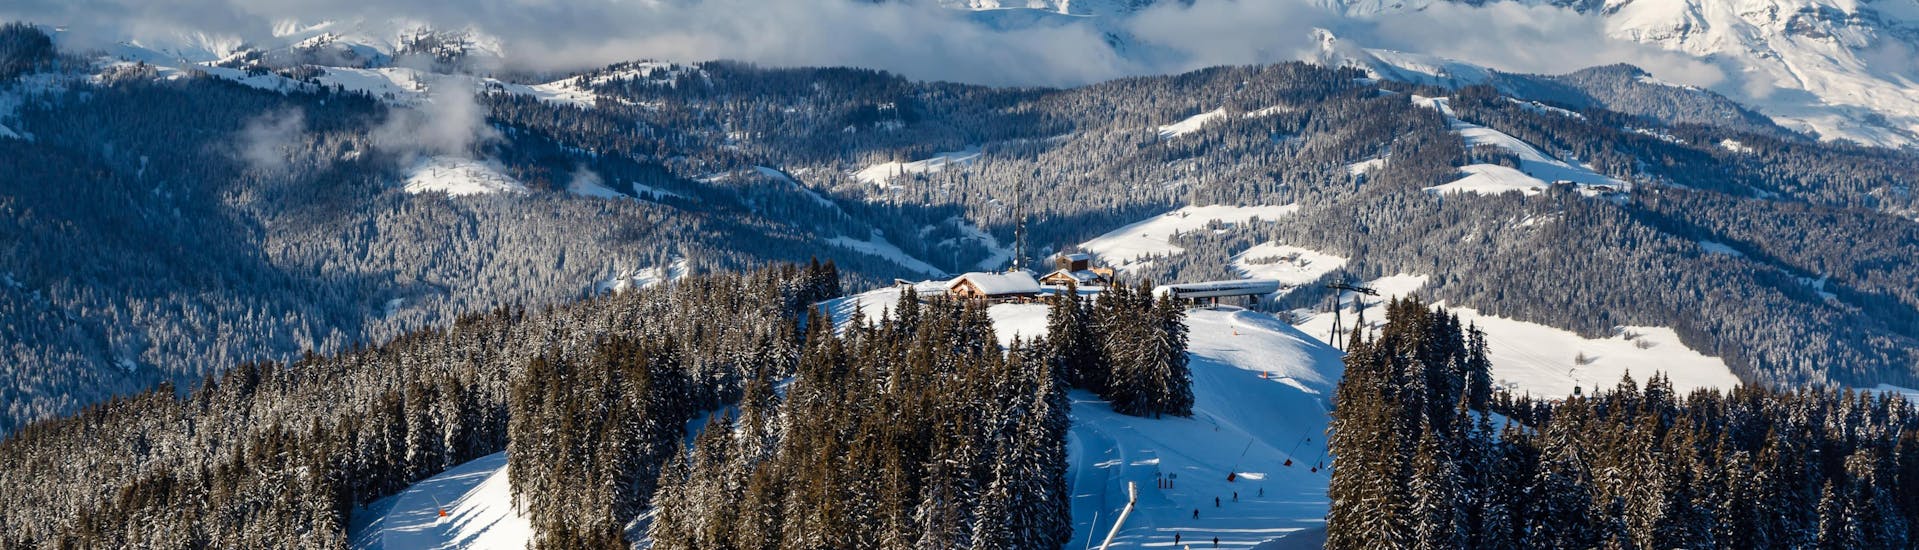 View of the slopes in the French ski resort of Megève where local ski schools offer a wide range of ski lessons to those who want to learn to ski.